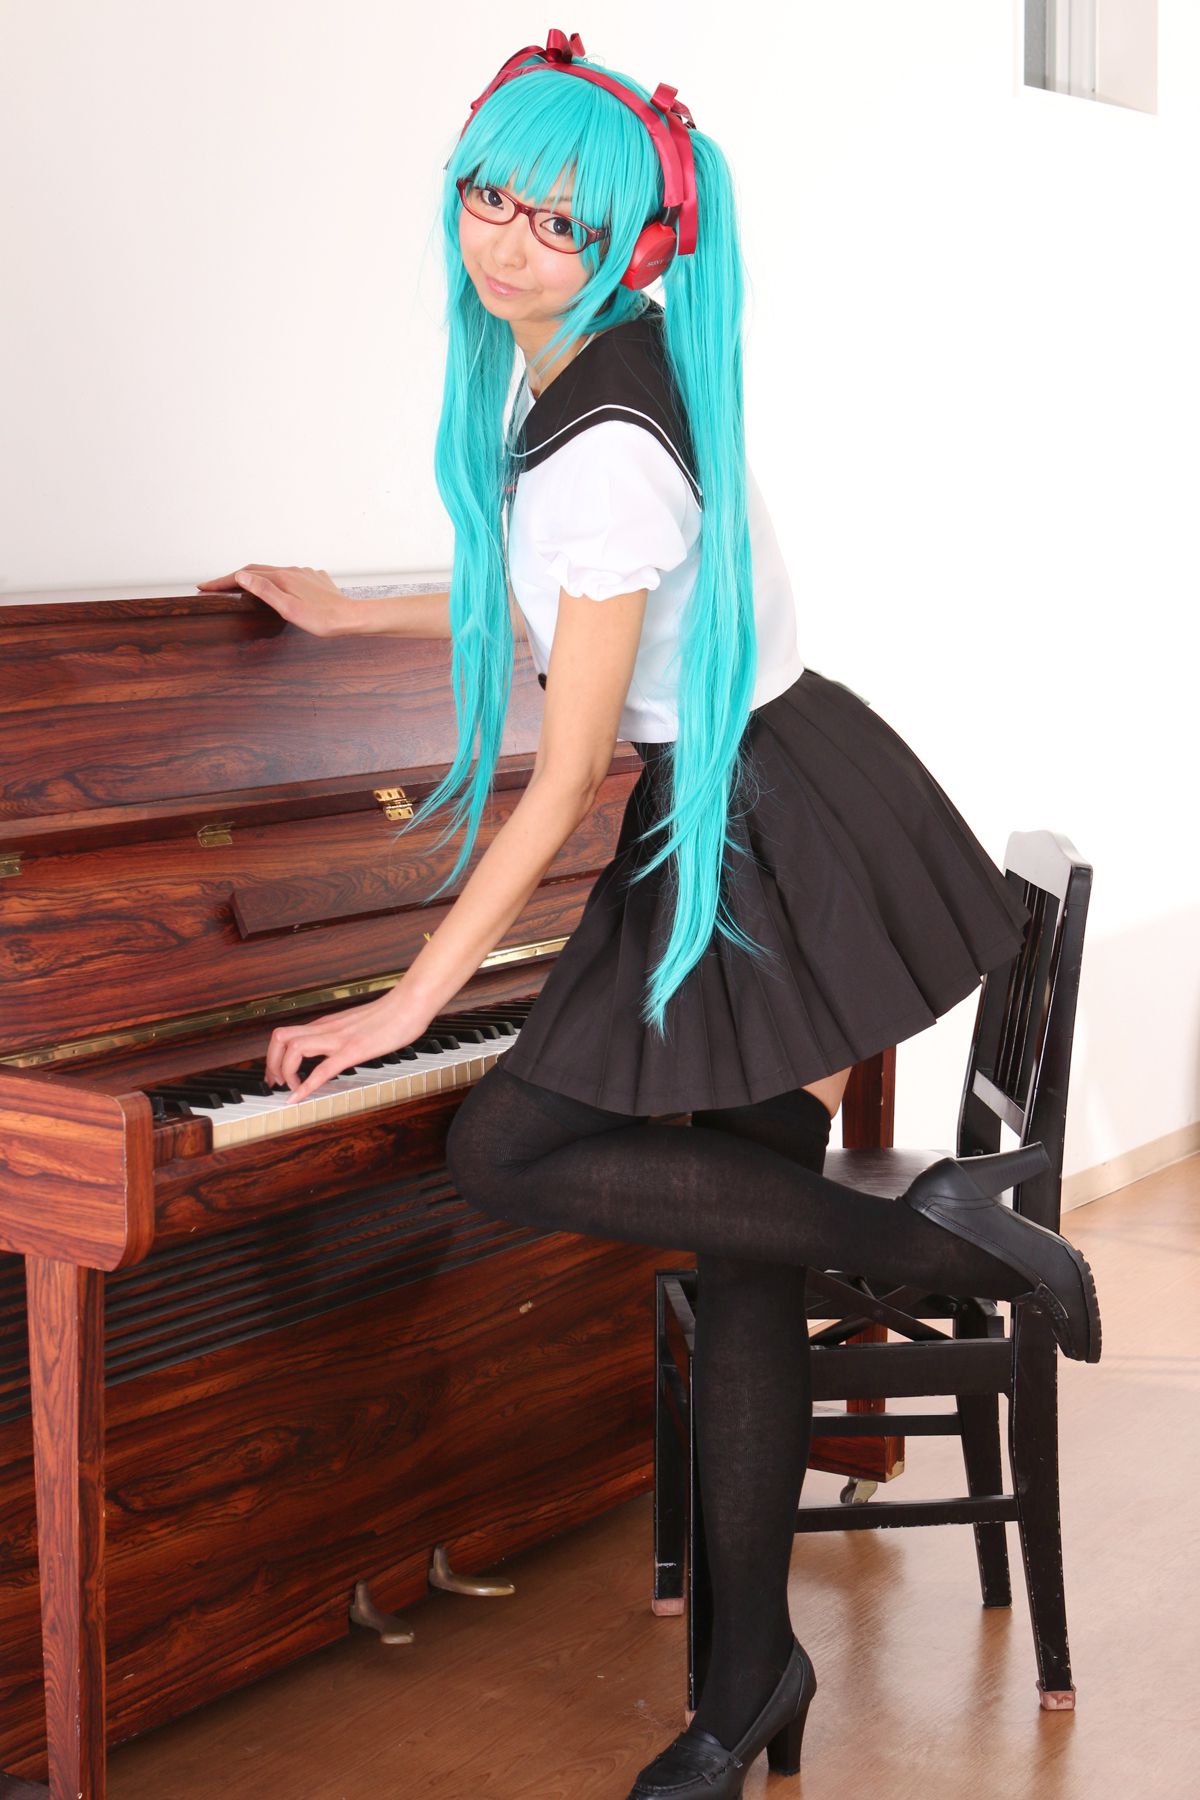 taotuhome[Cosplay套图] New Hatsune Miku from Vocaloid - So Sexy第133张